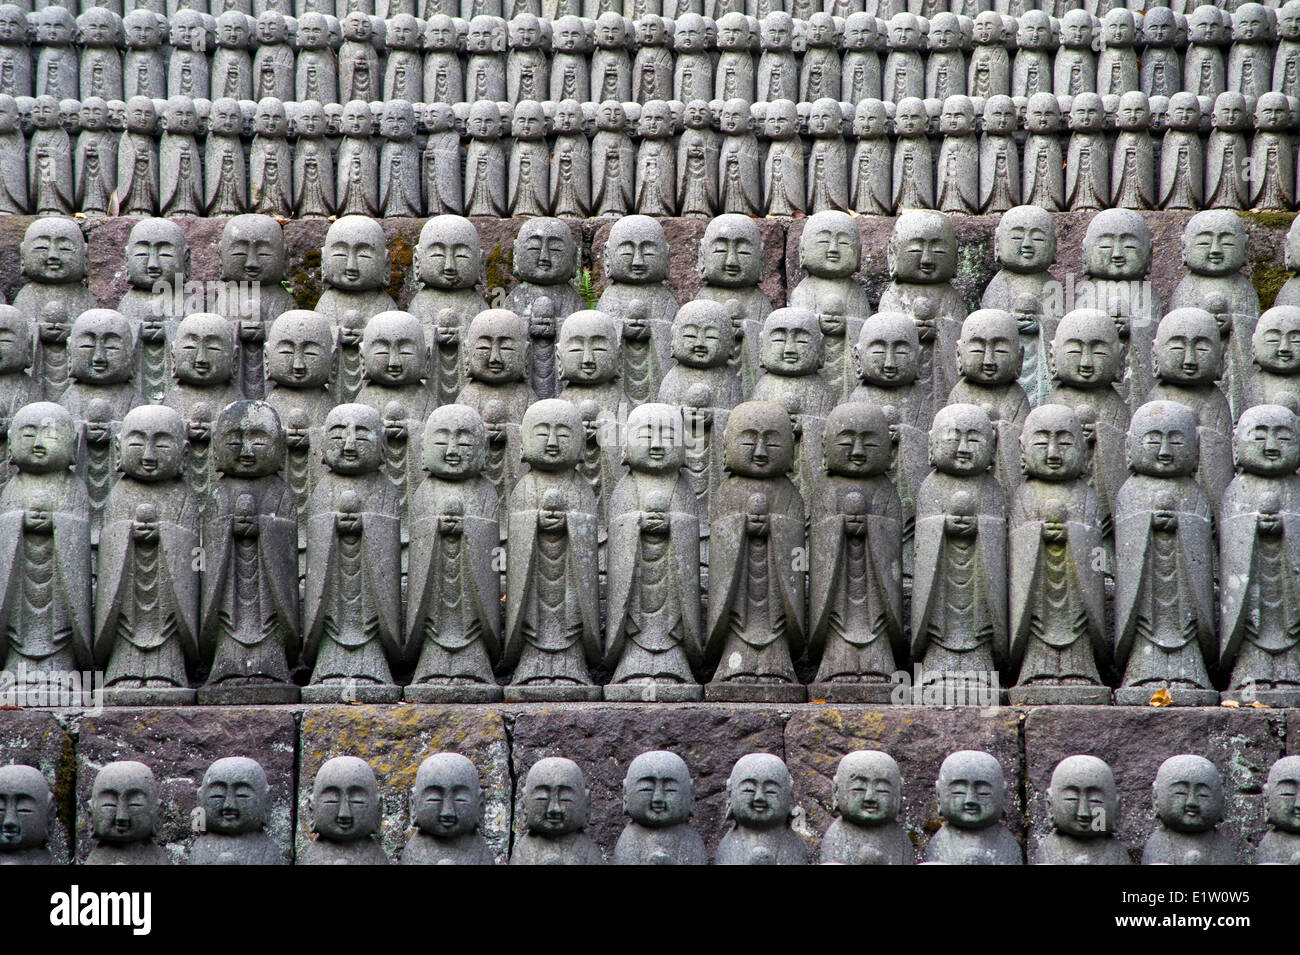 Numerous Jizo statuettes displayed at the entrance of Hasedera temple in Kamakura, Japan Stock Photo